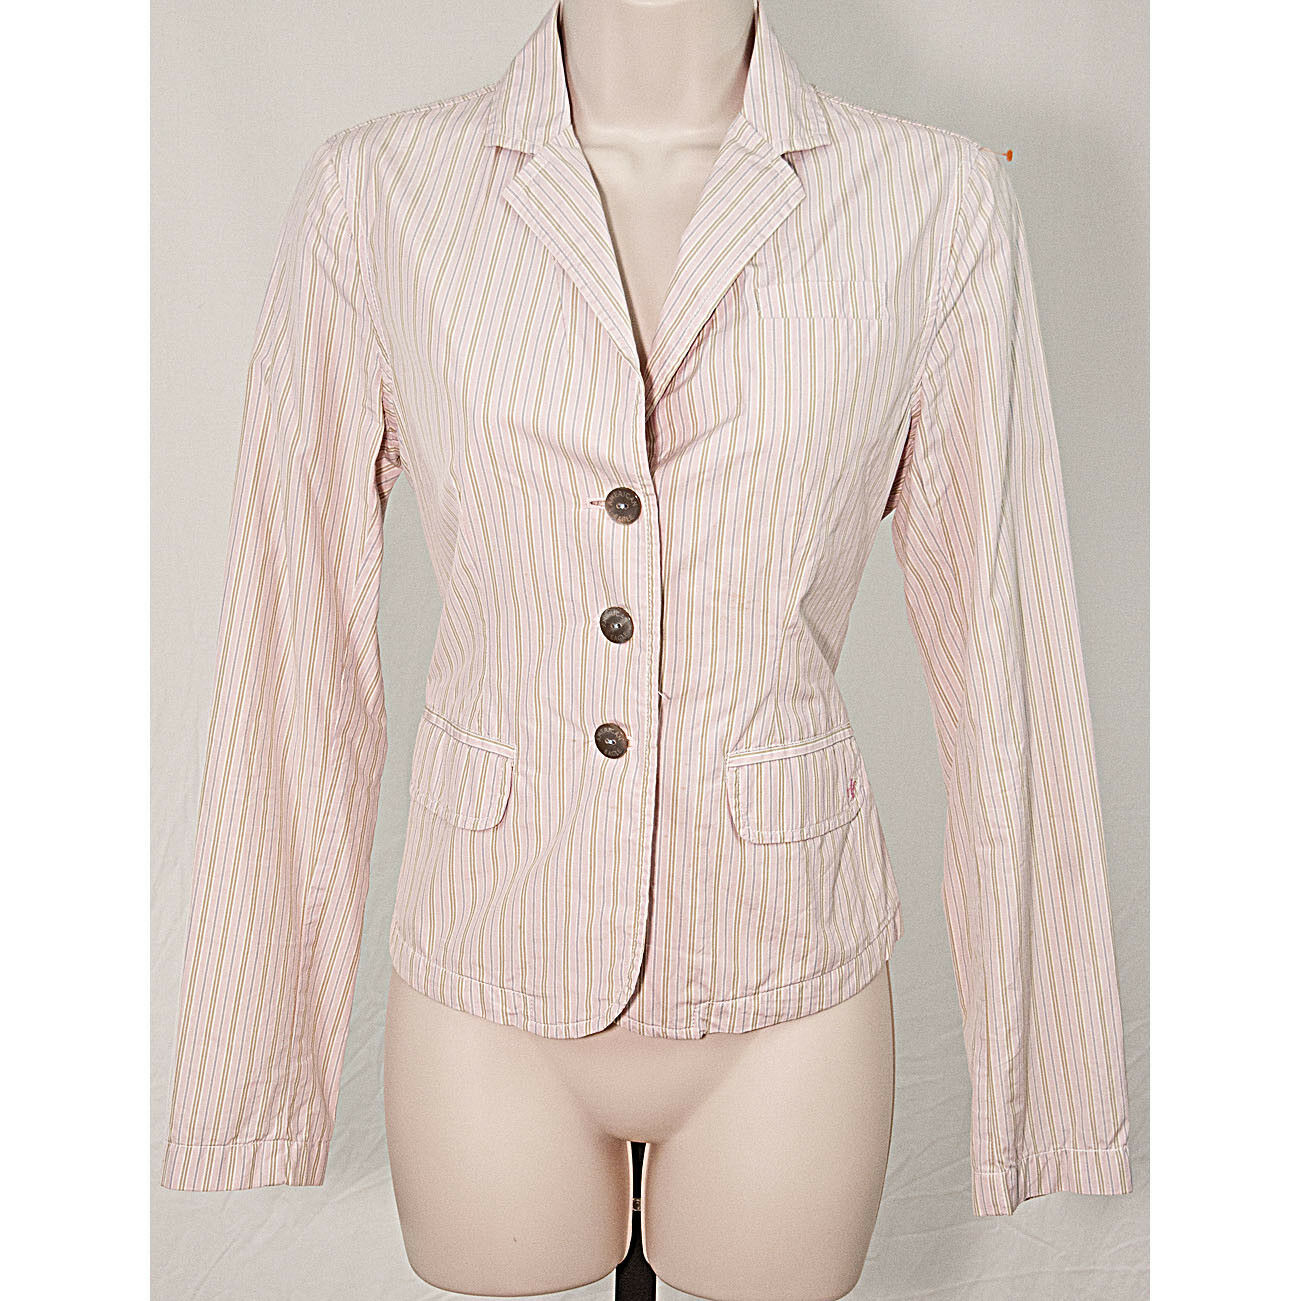 American Eagle Outfitters Pink Striped Stretch Blazer Jacket Size SP DEFECT